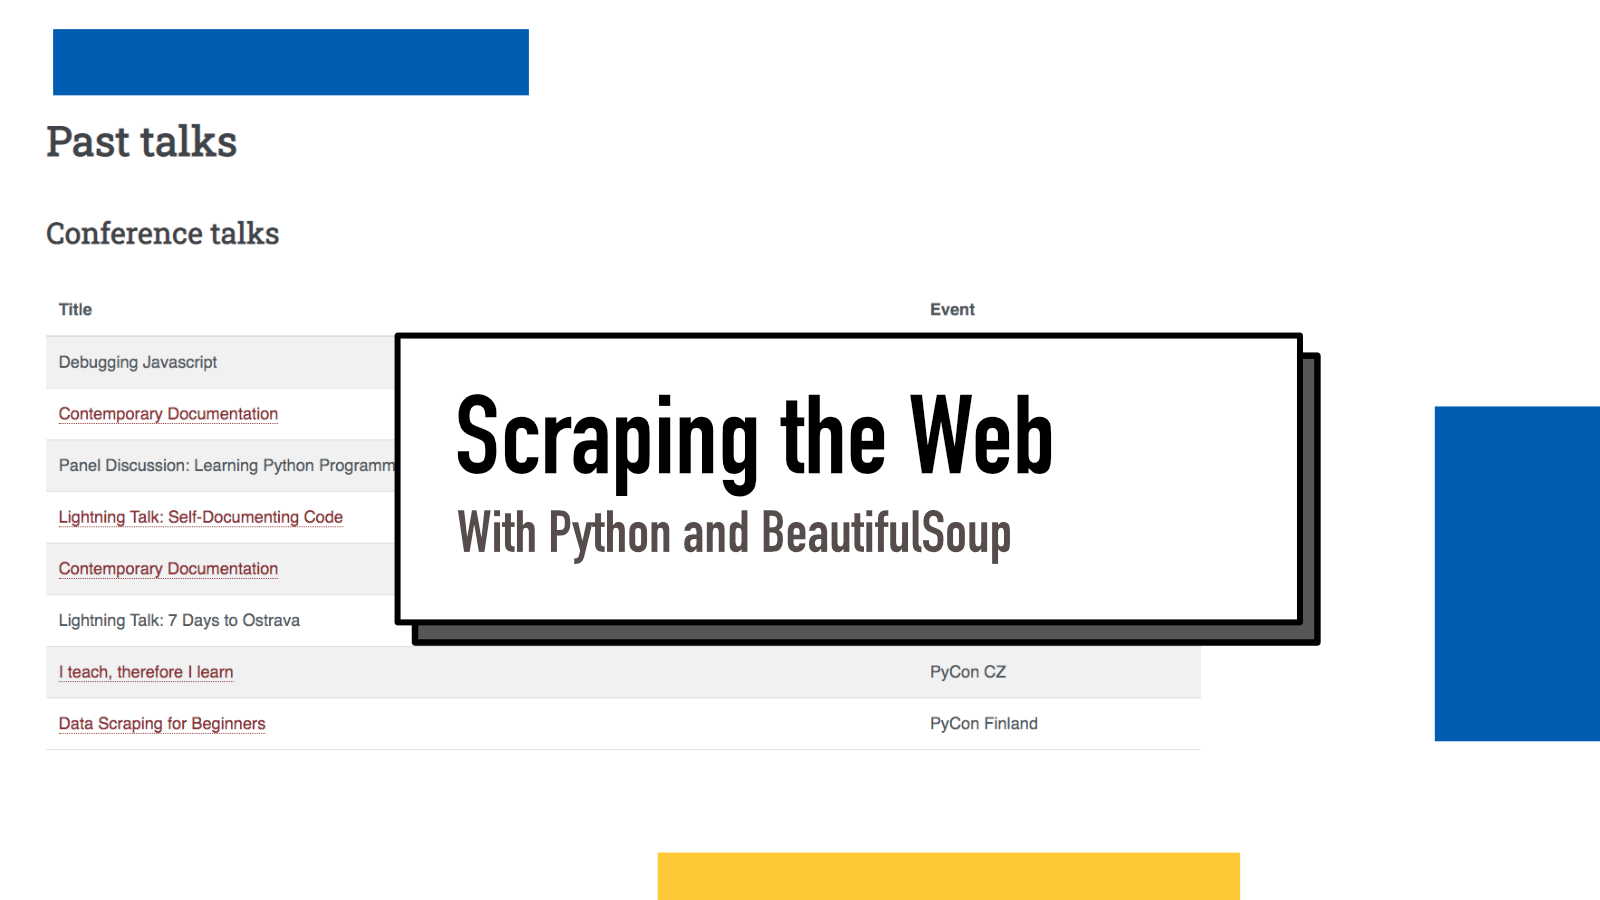 Beautiful Soup Tutorial - How to Parse Web Data With Python